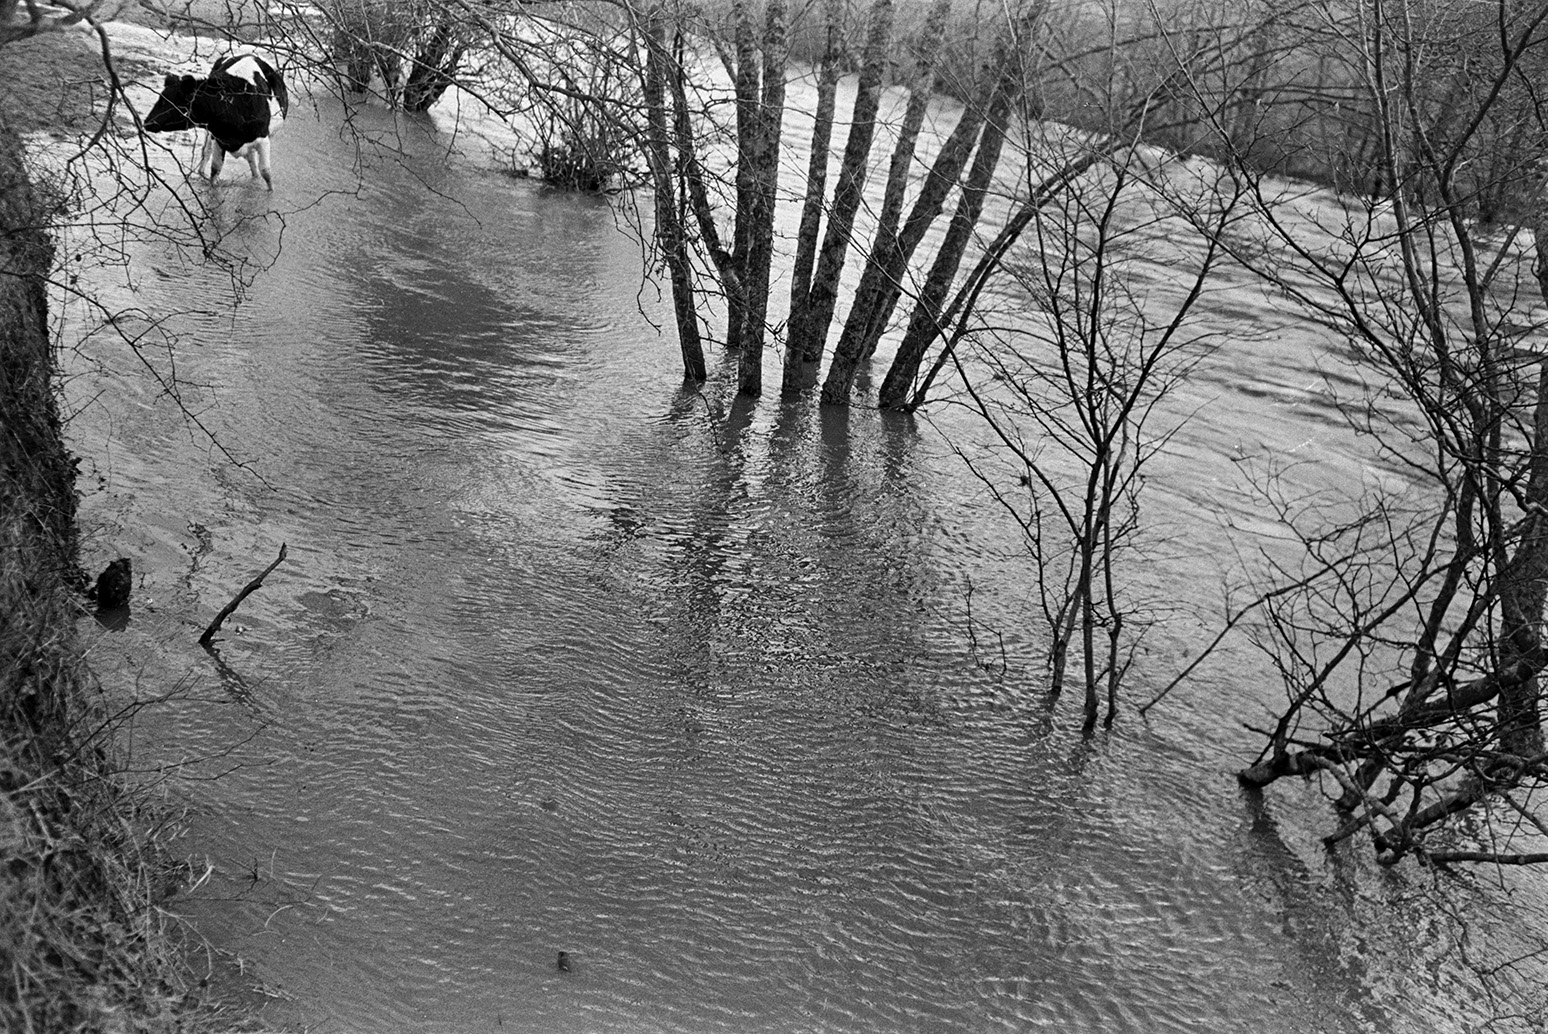 A cow walking through the flooded River Torridge in a field at Mill Road Farm, Beaford. The farm was also known as Jeffrys.